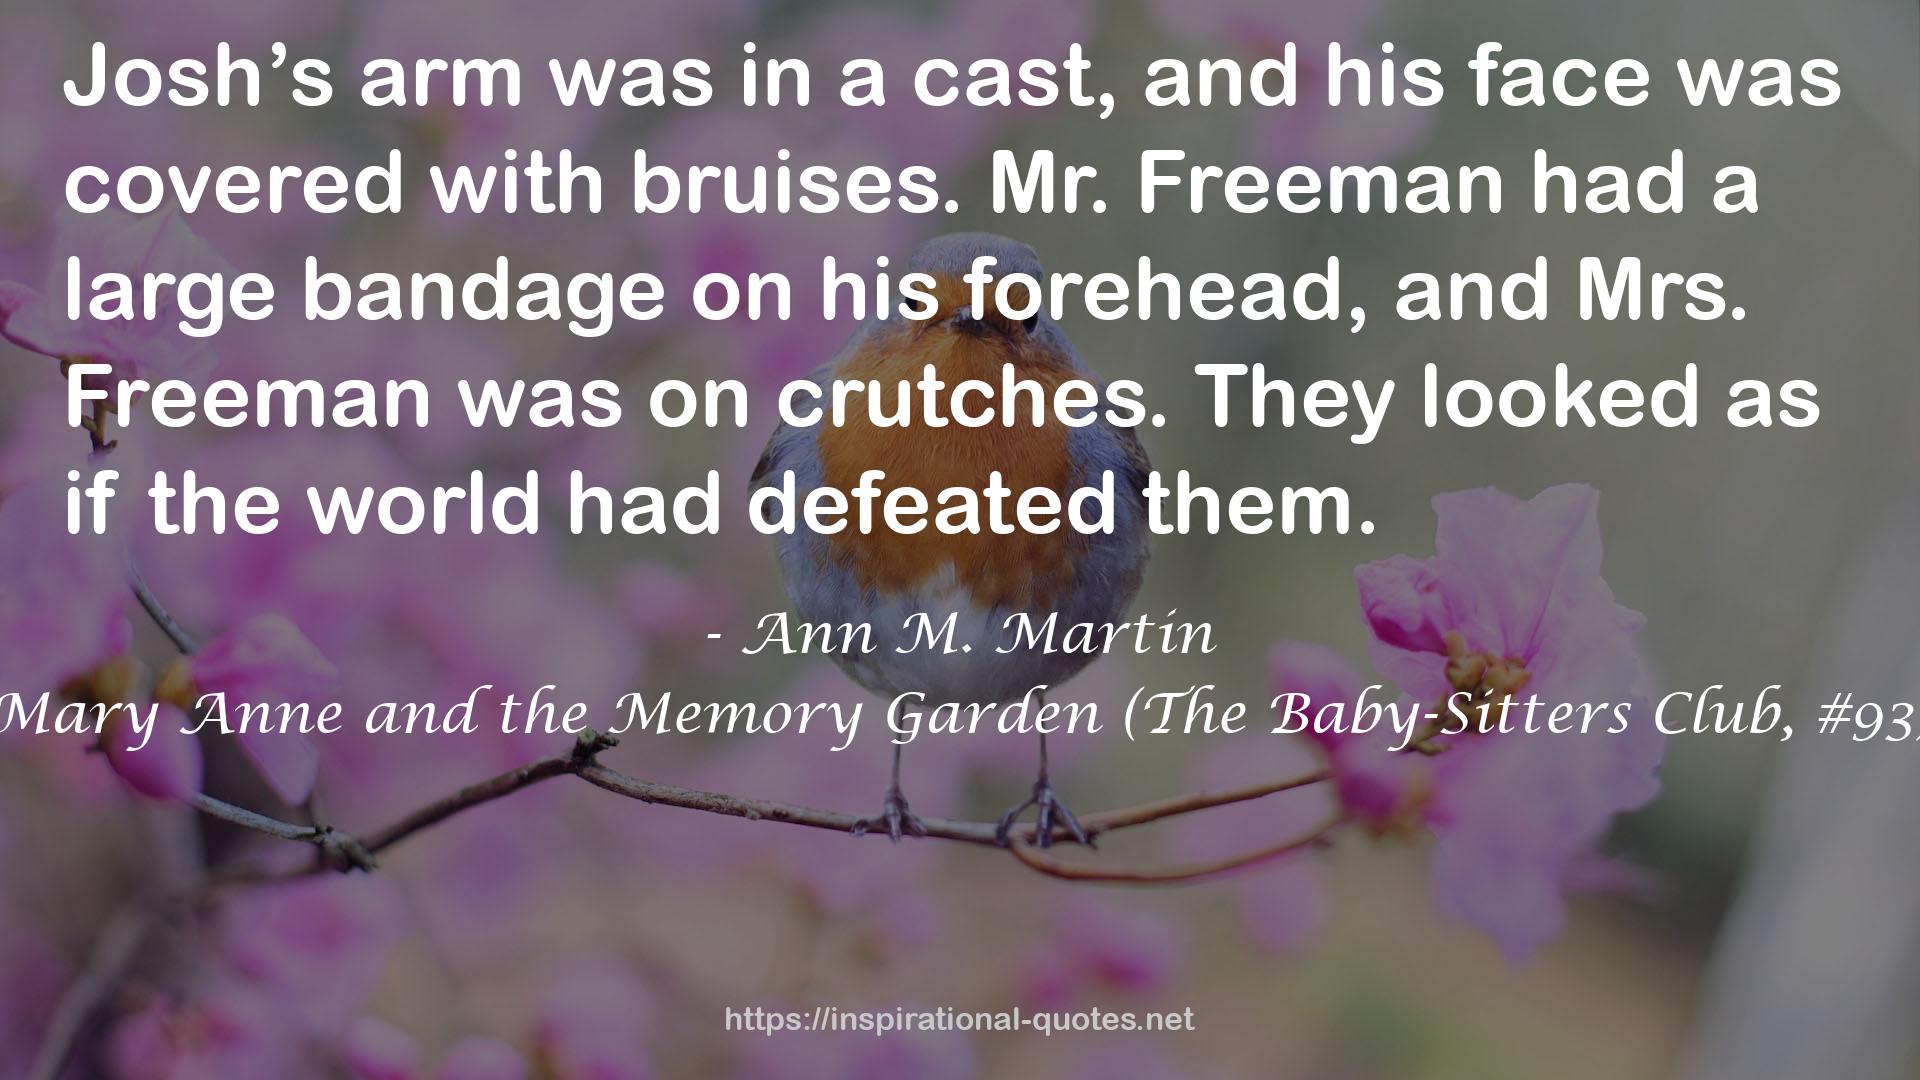 Mary Anne and the Memory Garden (The Baby-Sitters Club, #93) QUOTES